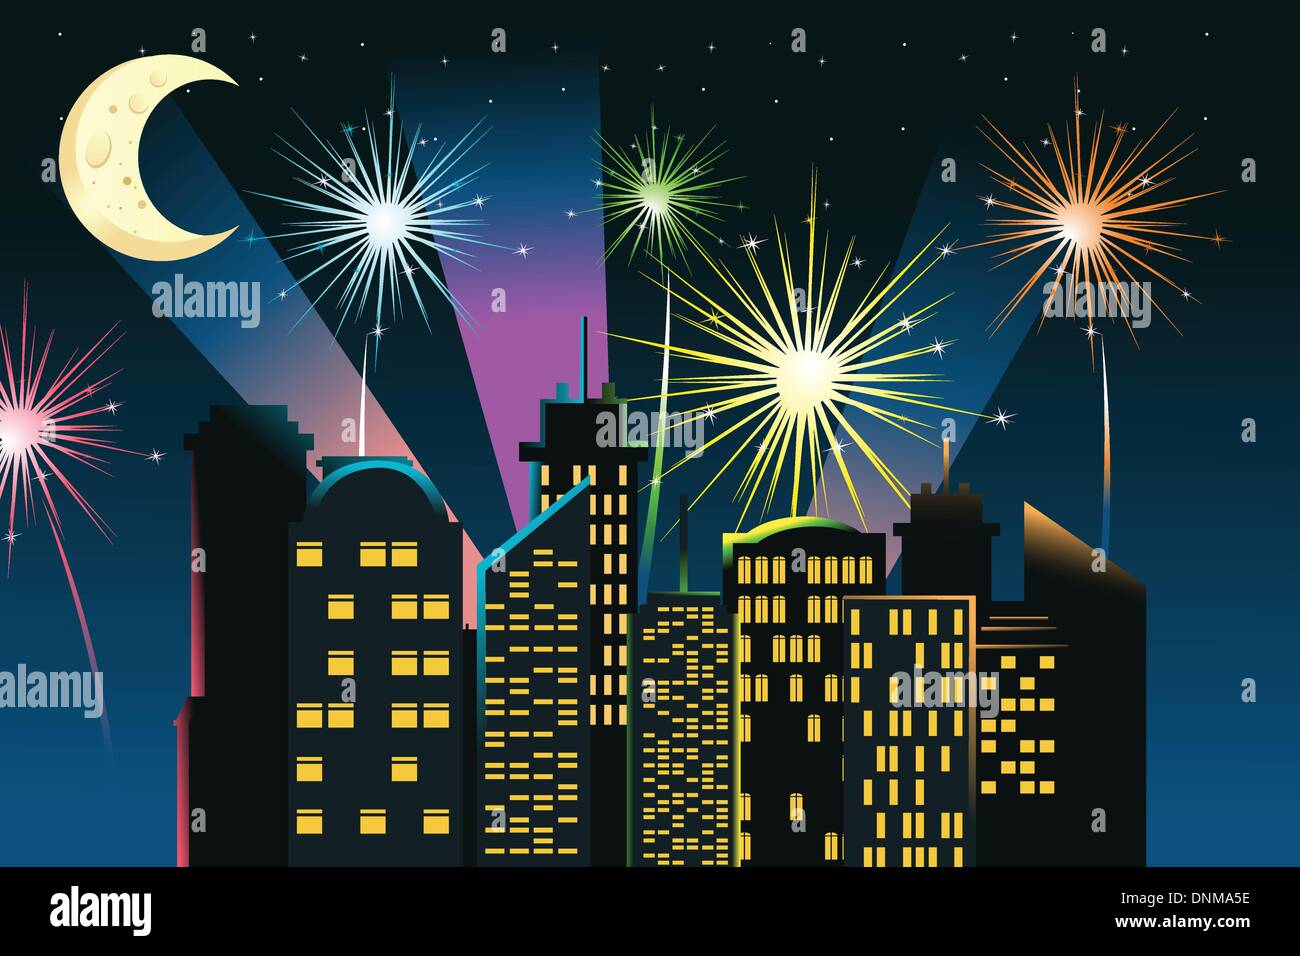 A vector illustration of fireworks in the city Stock Vector